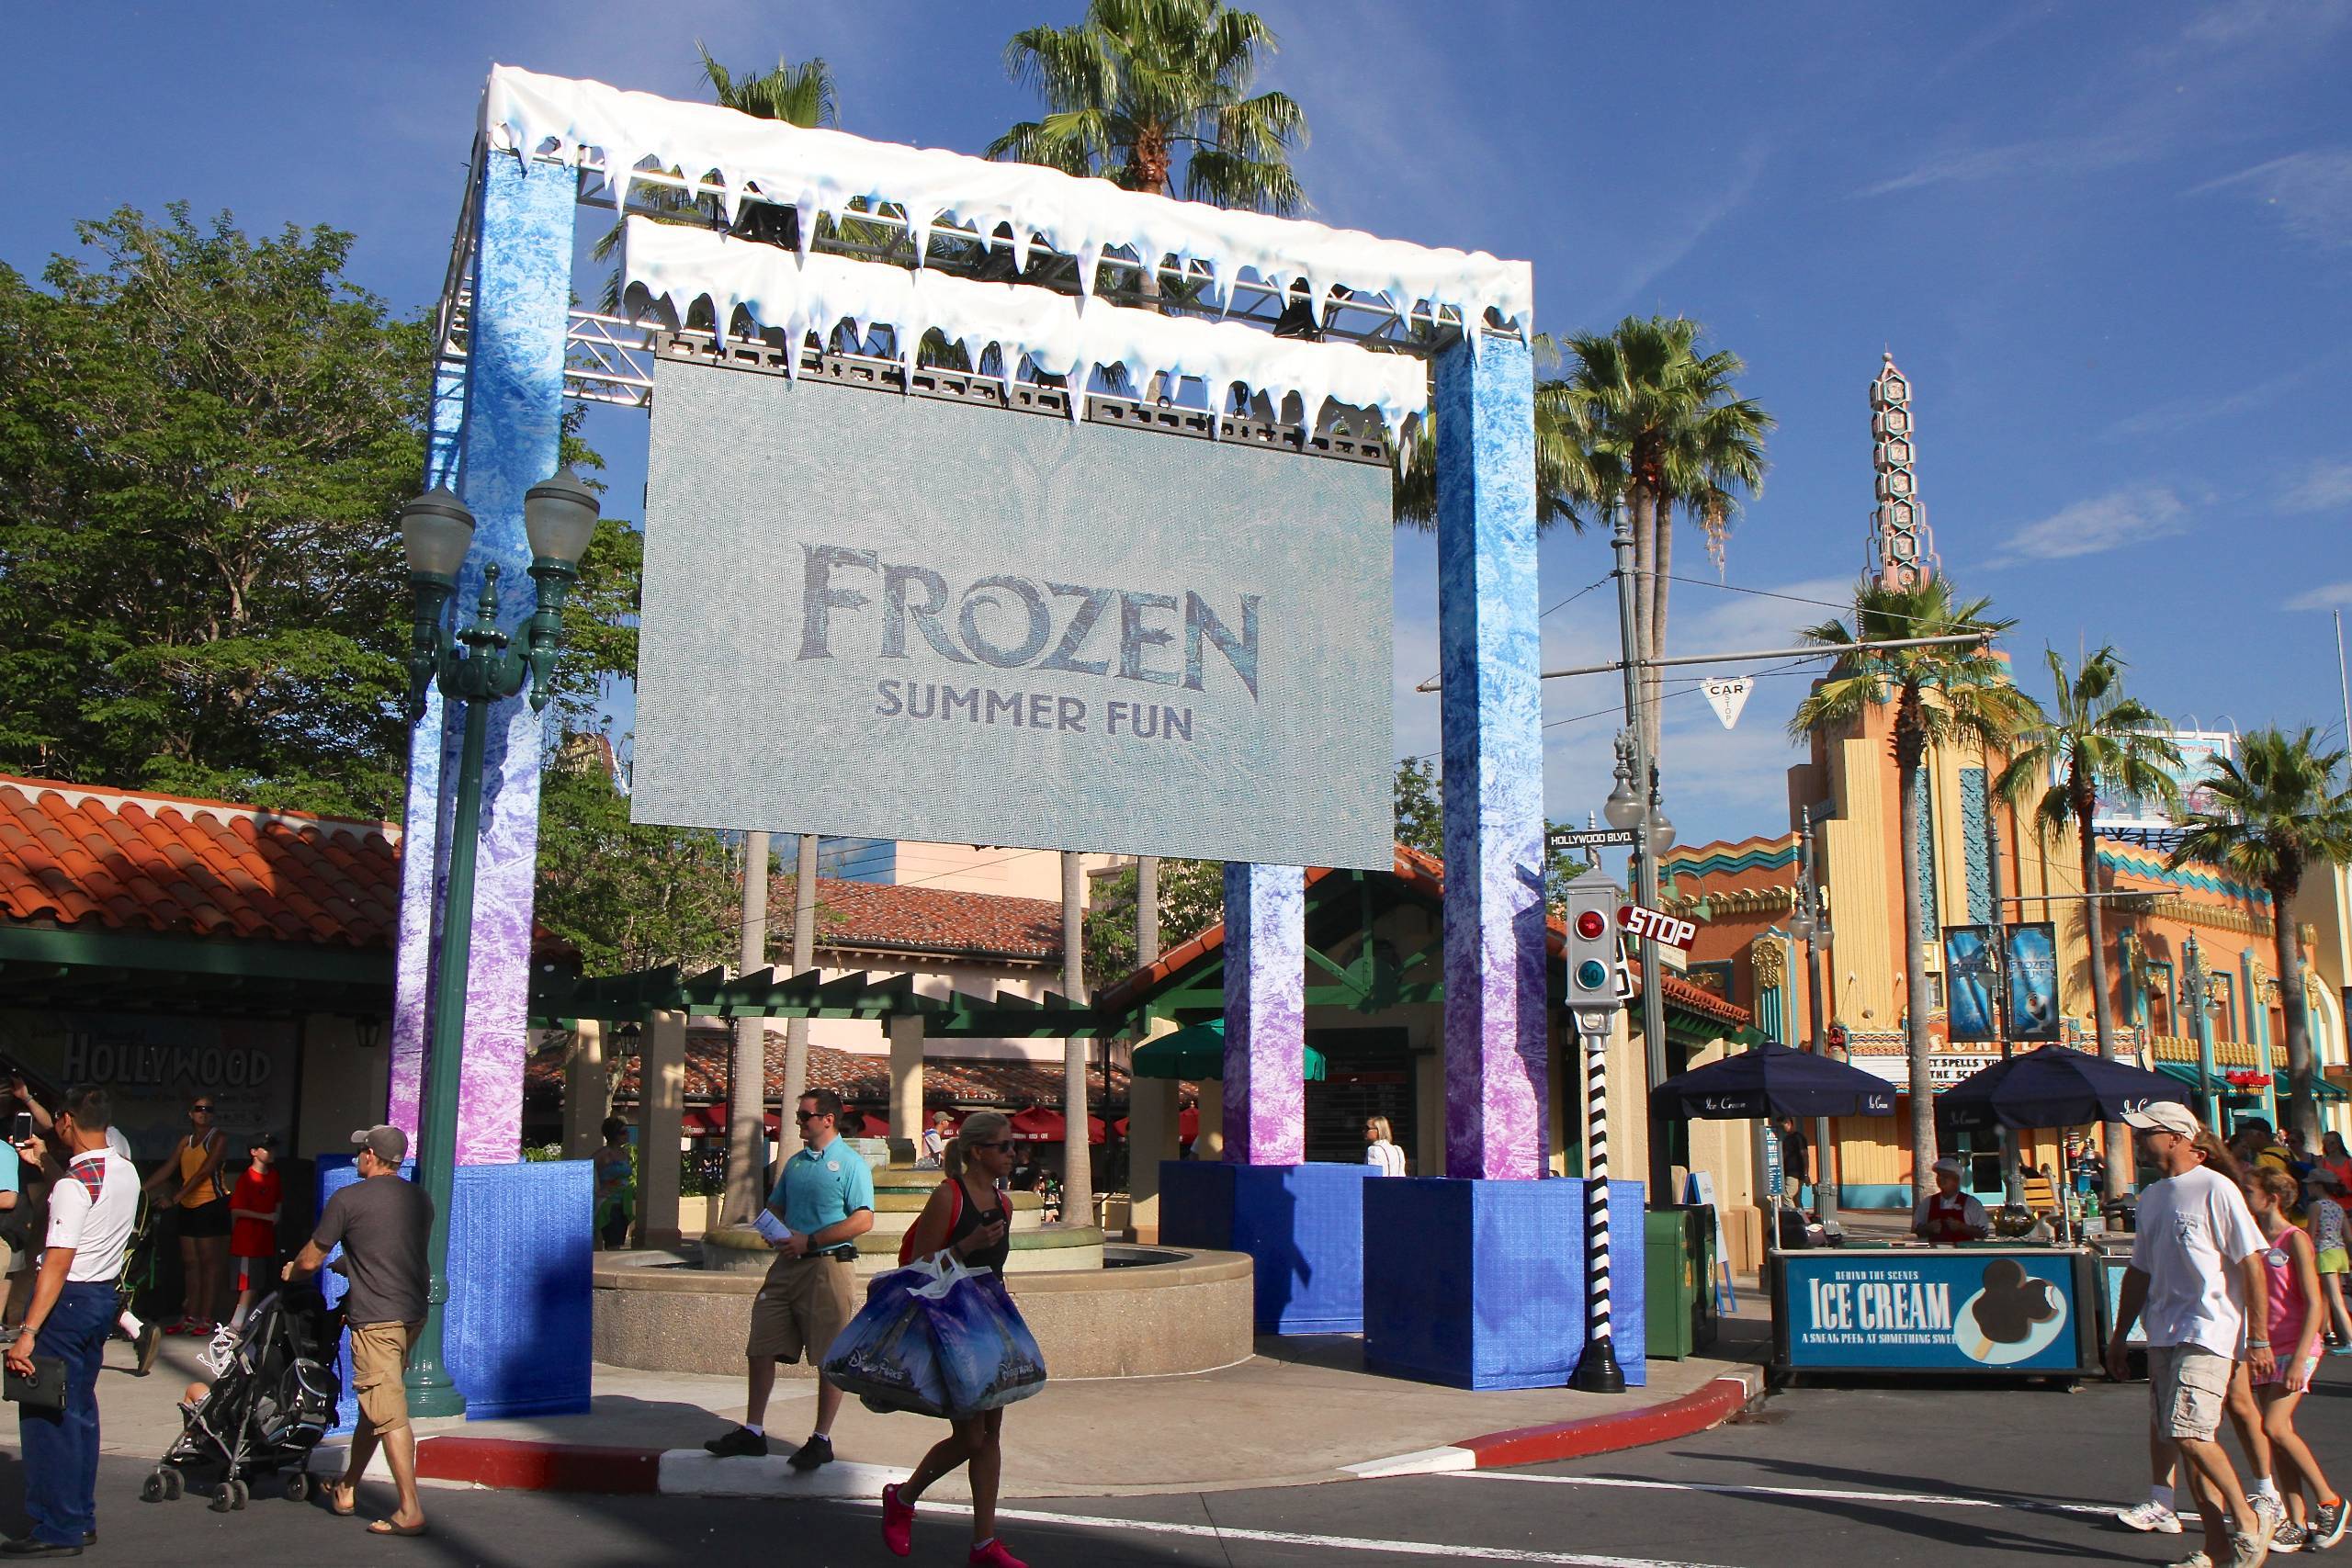 PHOTOS and VIDEO - Opening day at Frozen Summer Fun - LIVE at Disney's Hollywood Studios